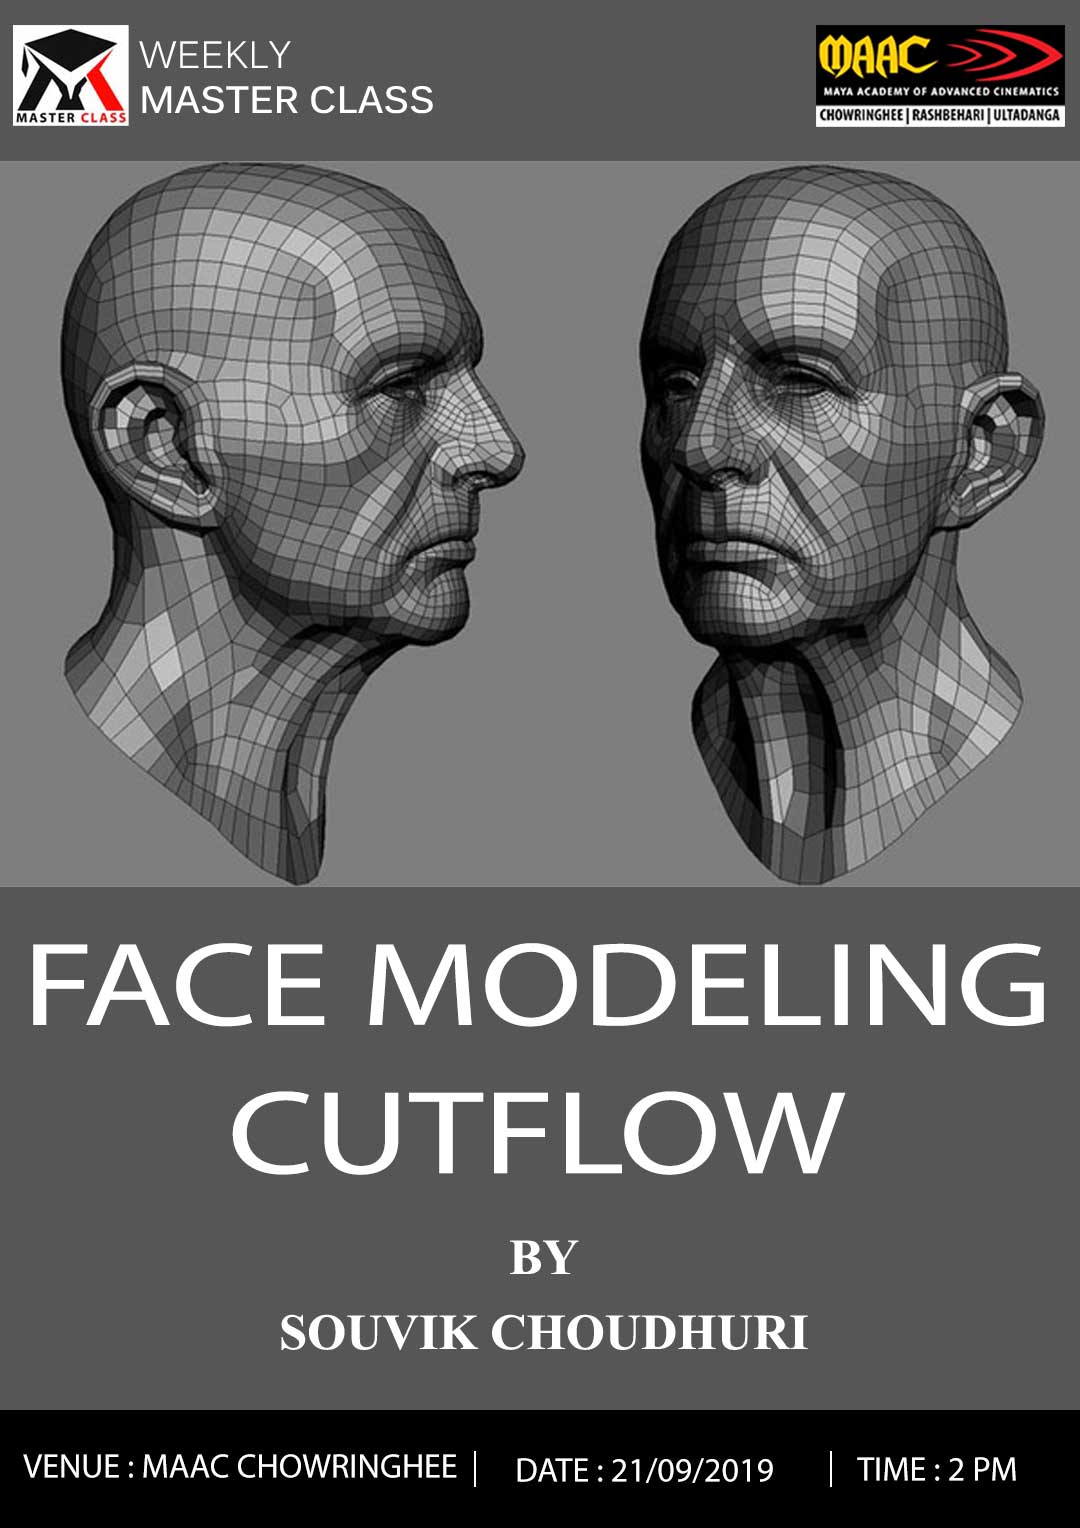 Weekly Master Class on Face Modeling Cut Flow